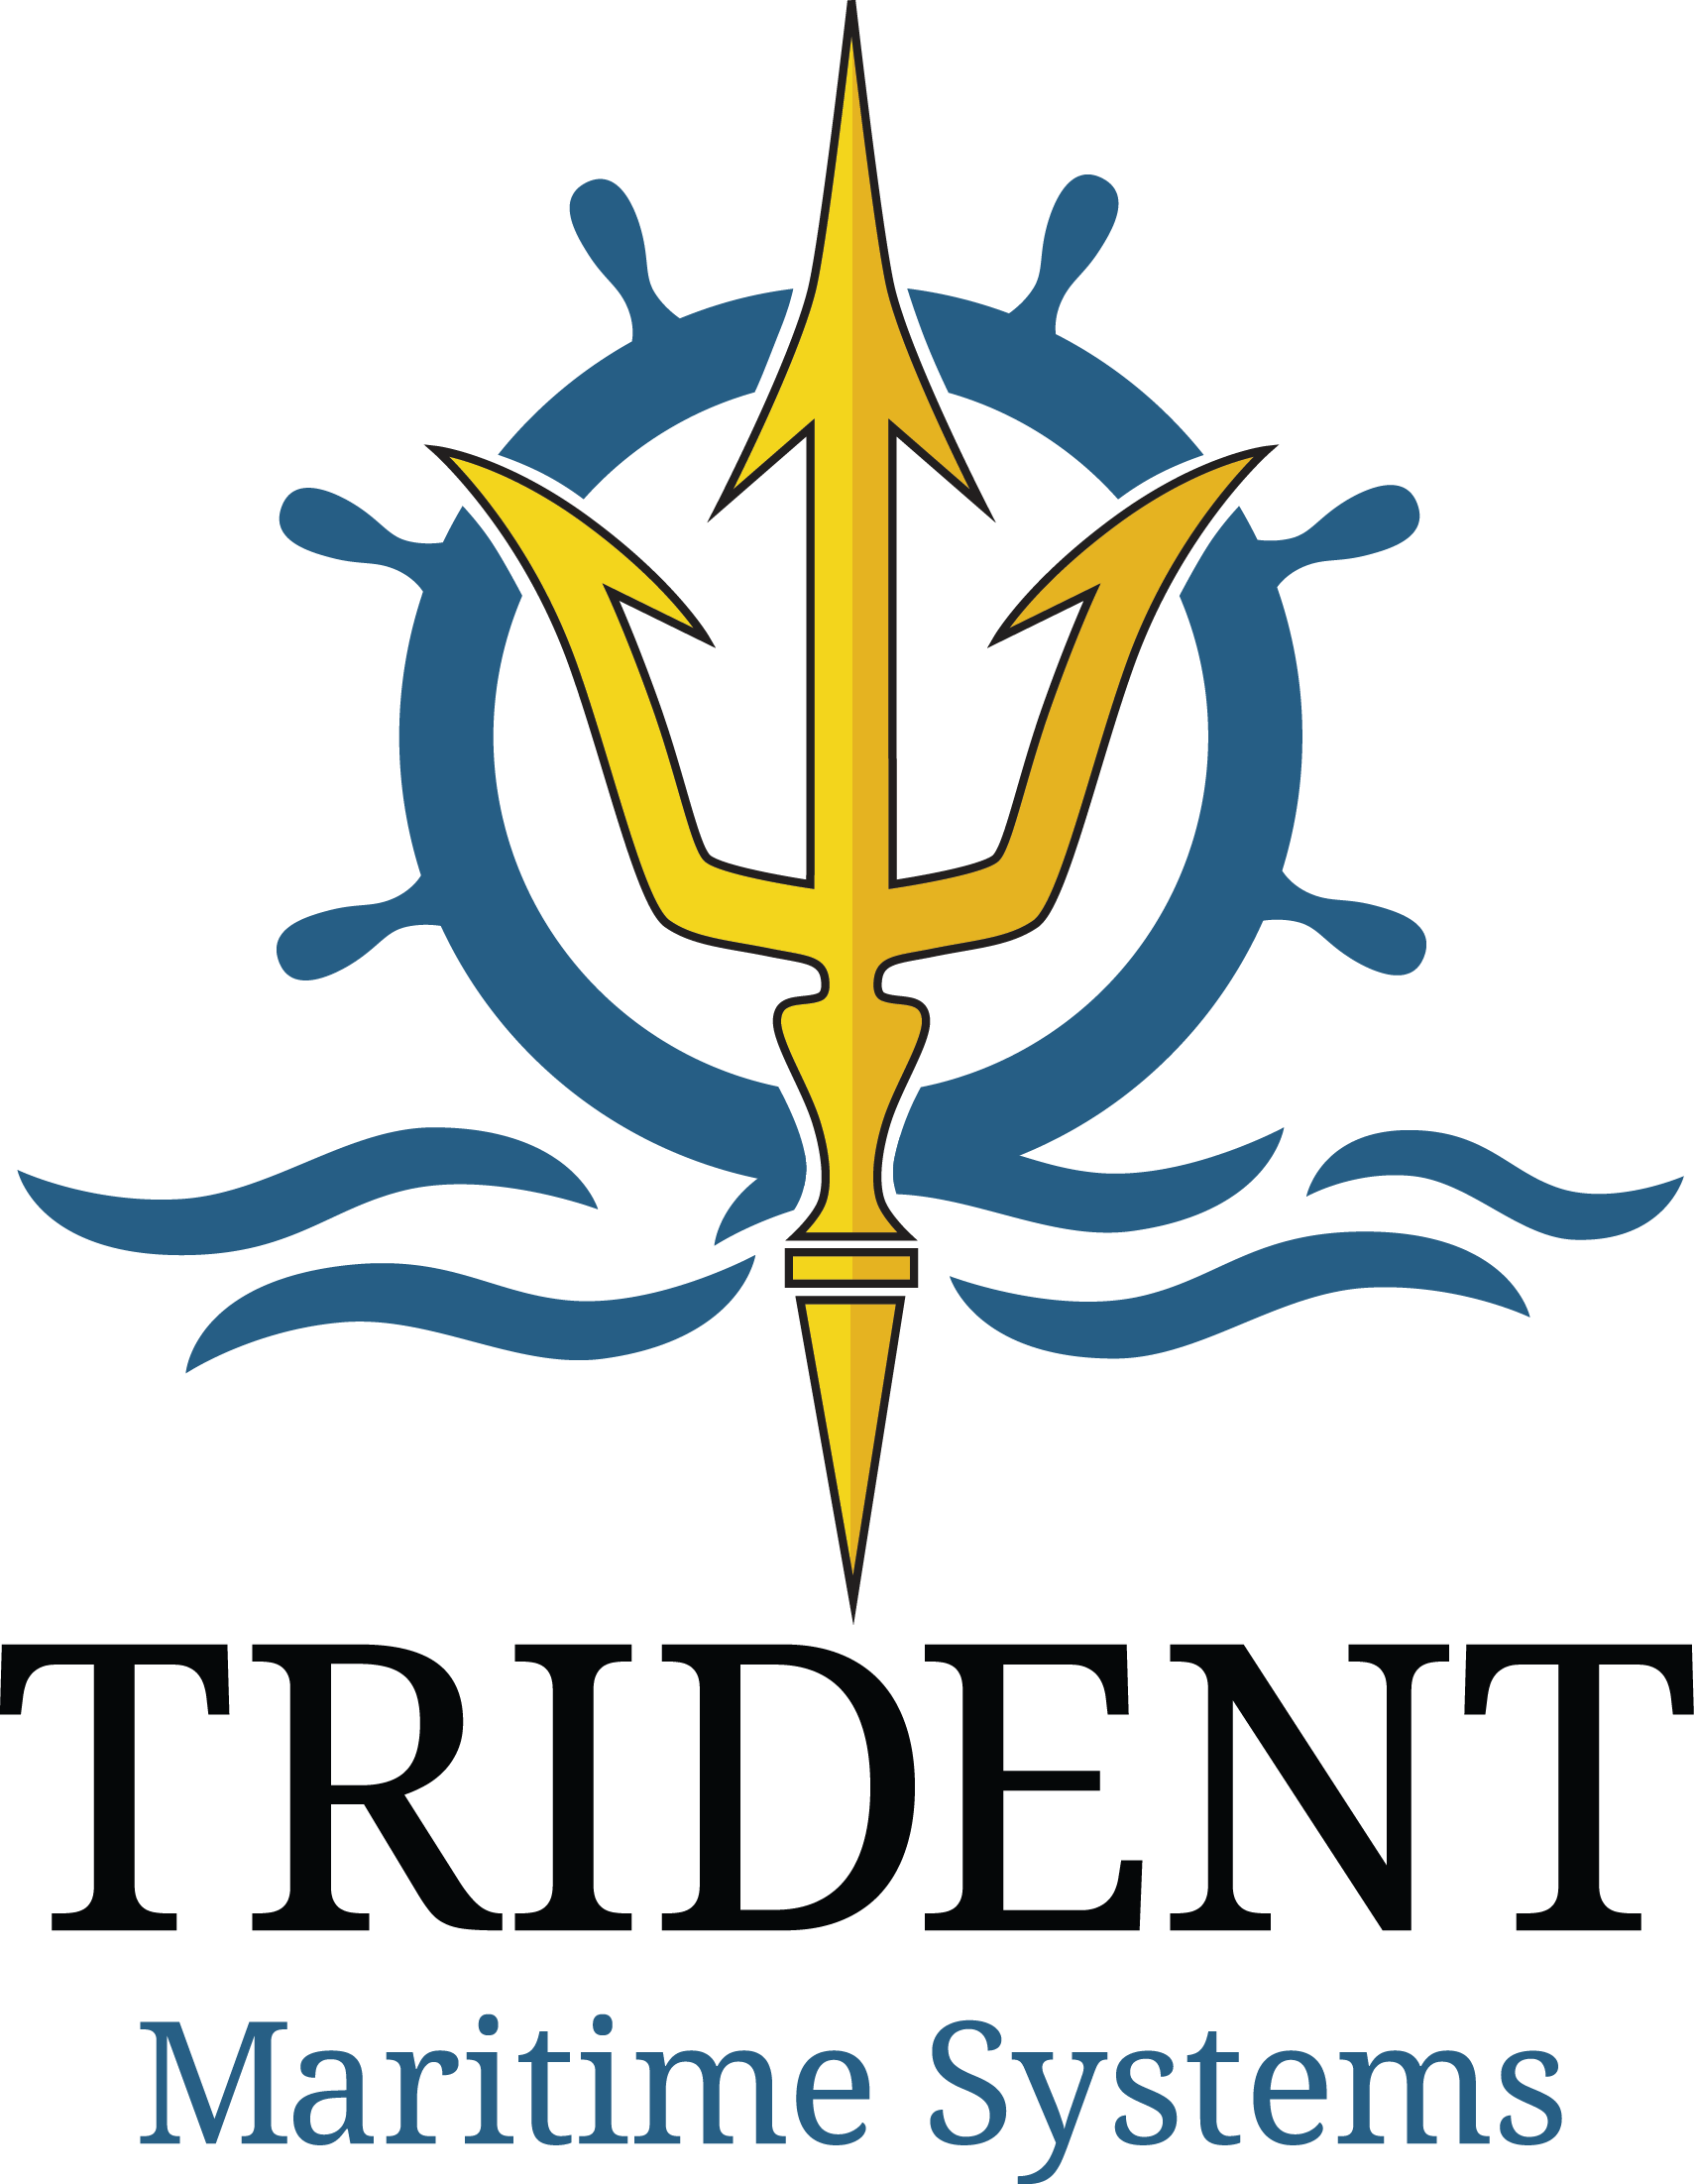 Trident Maritime Systems Sells Cannon Mining Division to J.H. Fletcher & Co., June 15 2022